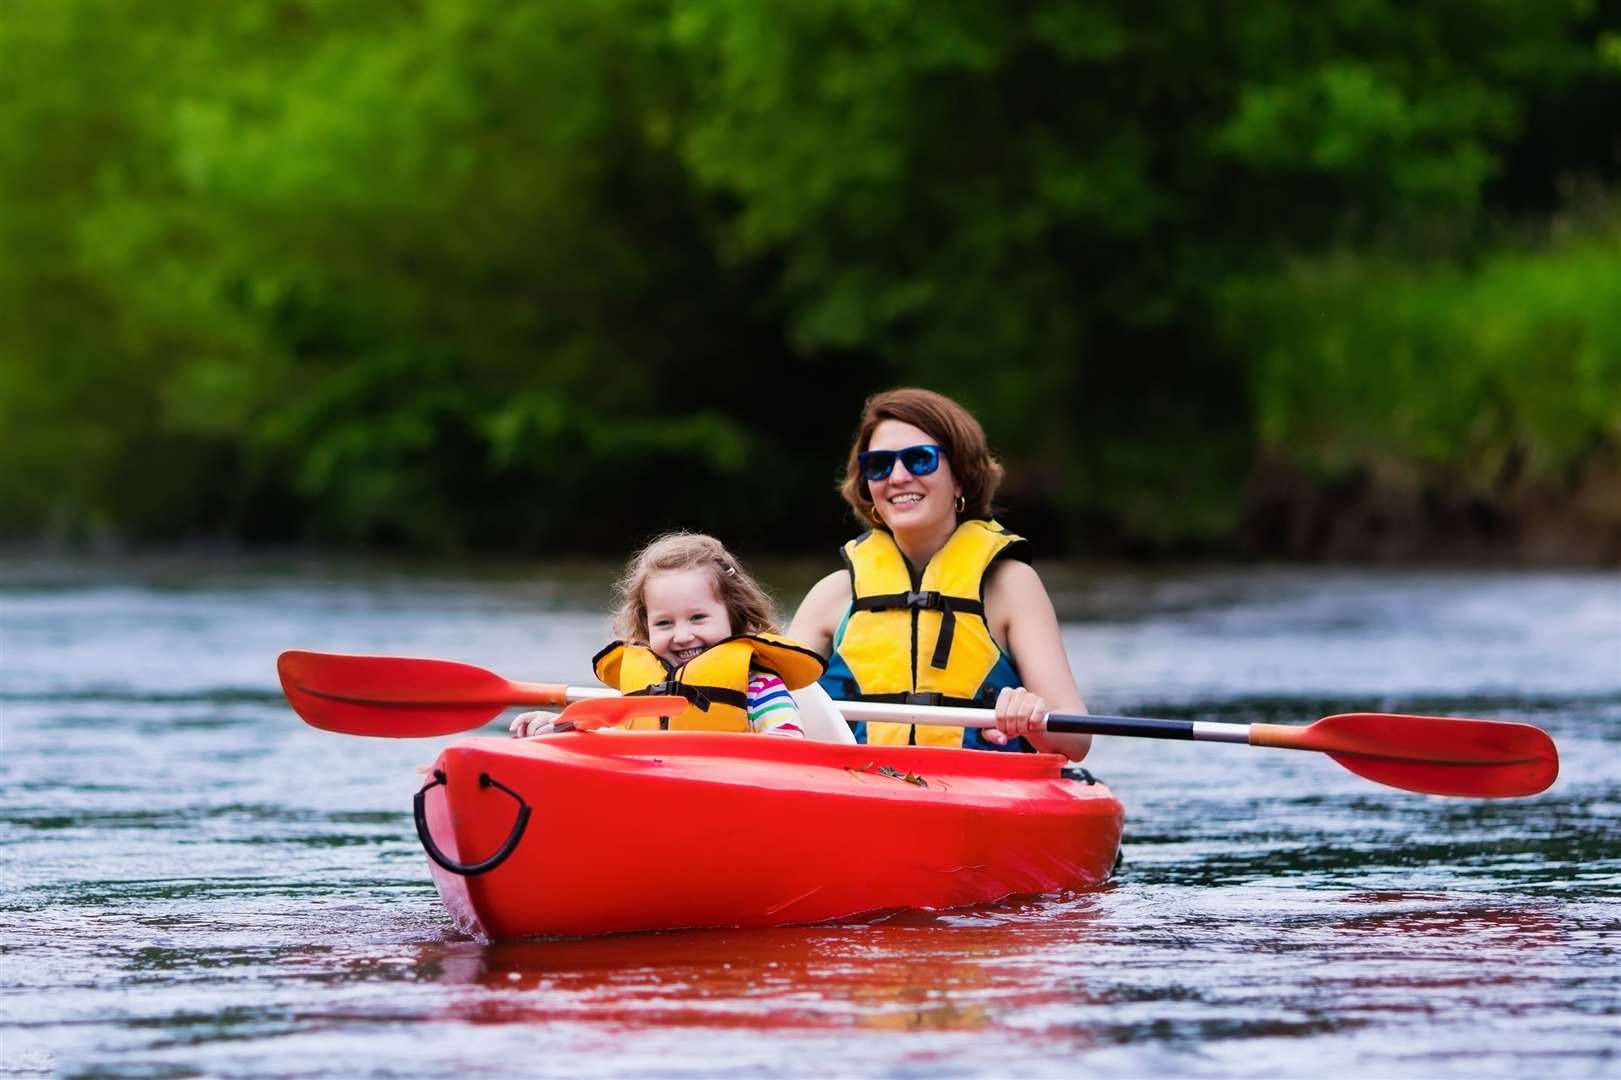 Do you fancy getting the family out on the water?